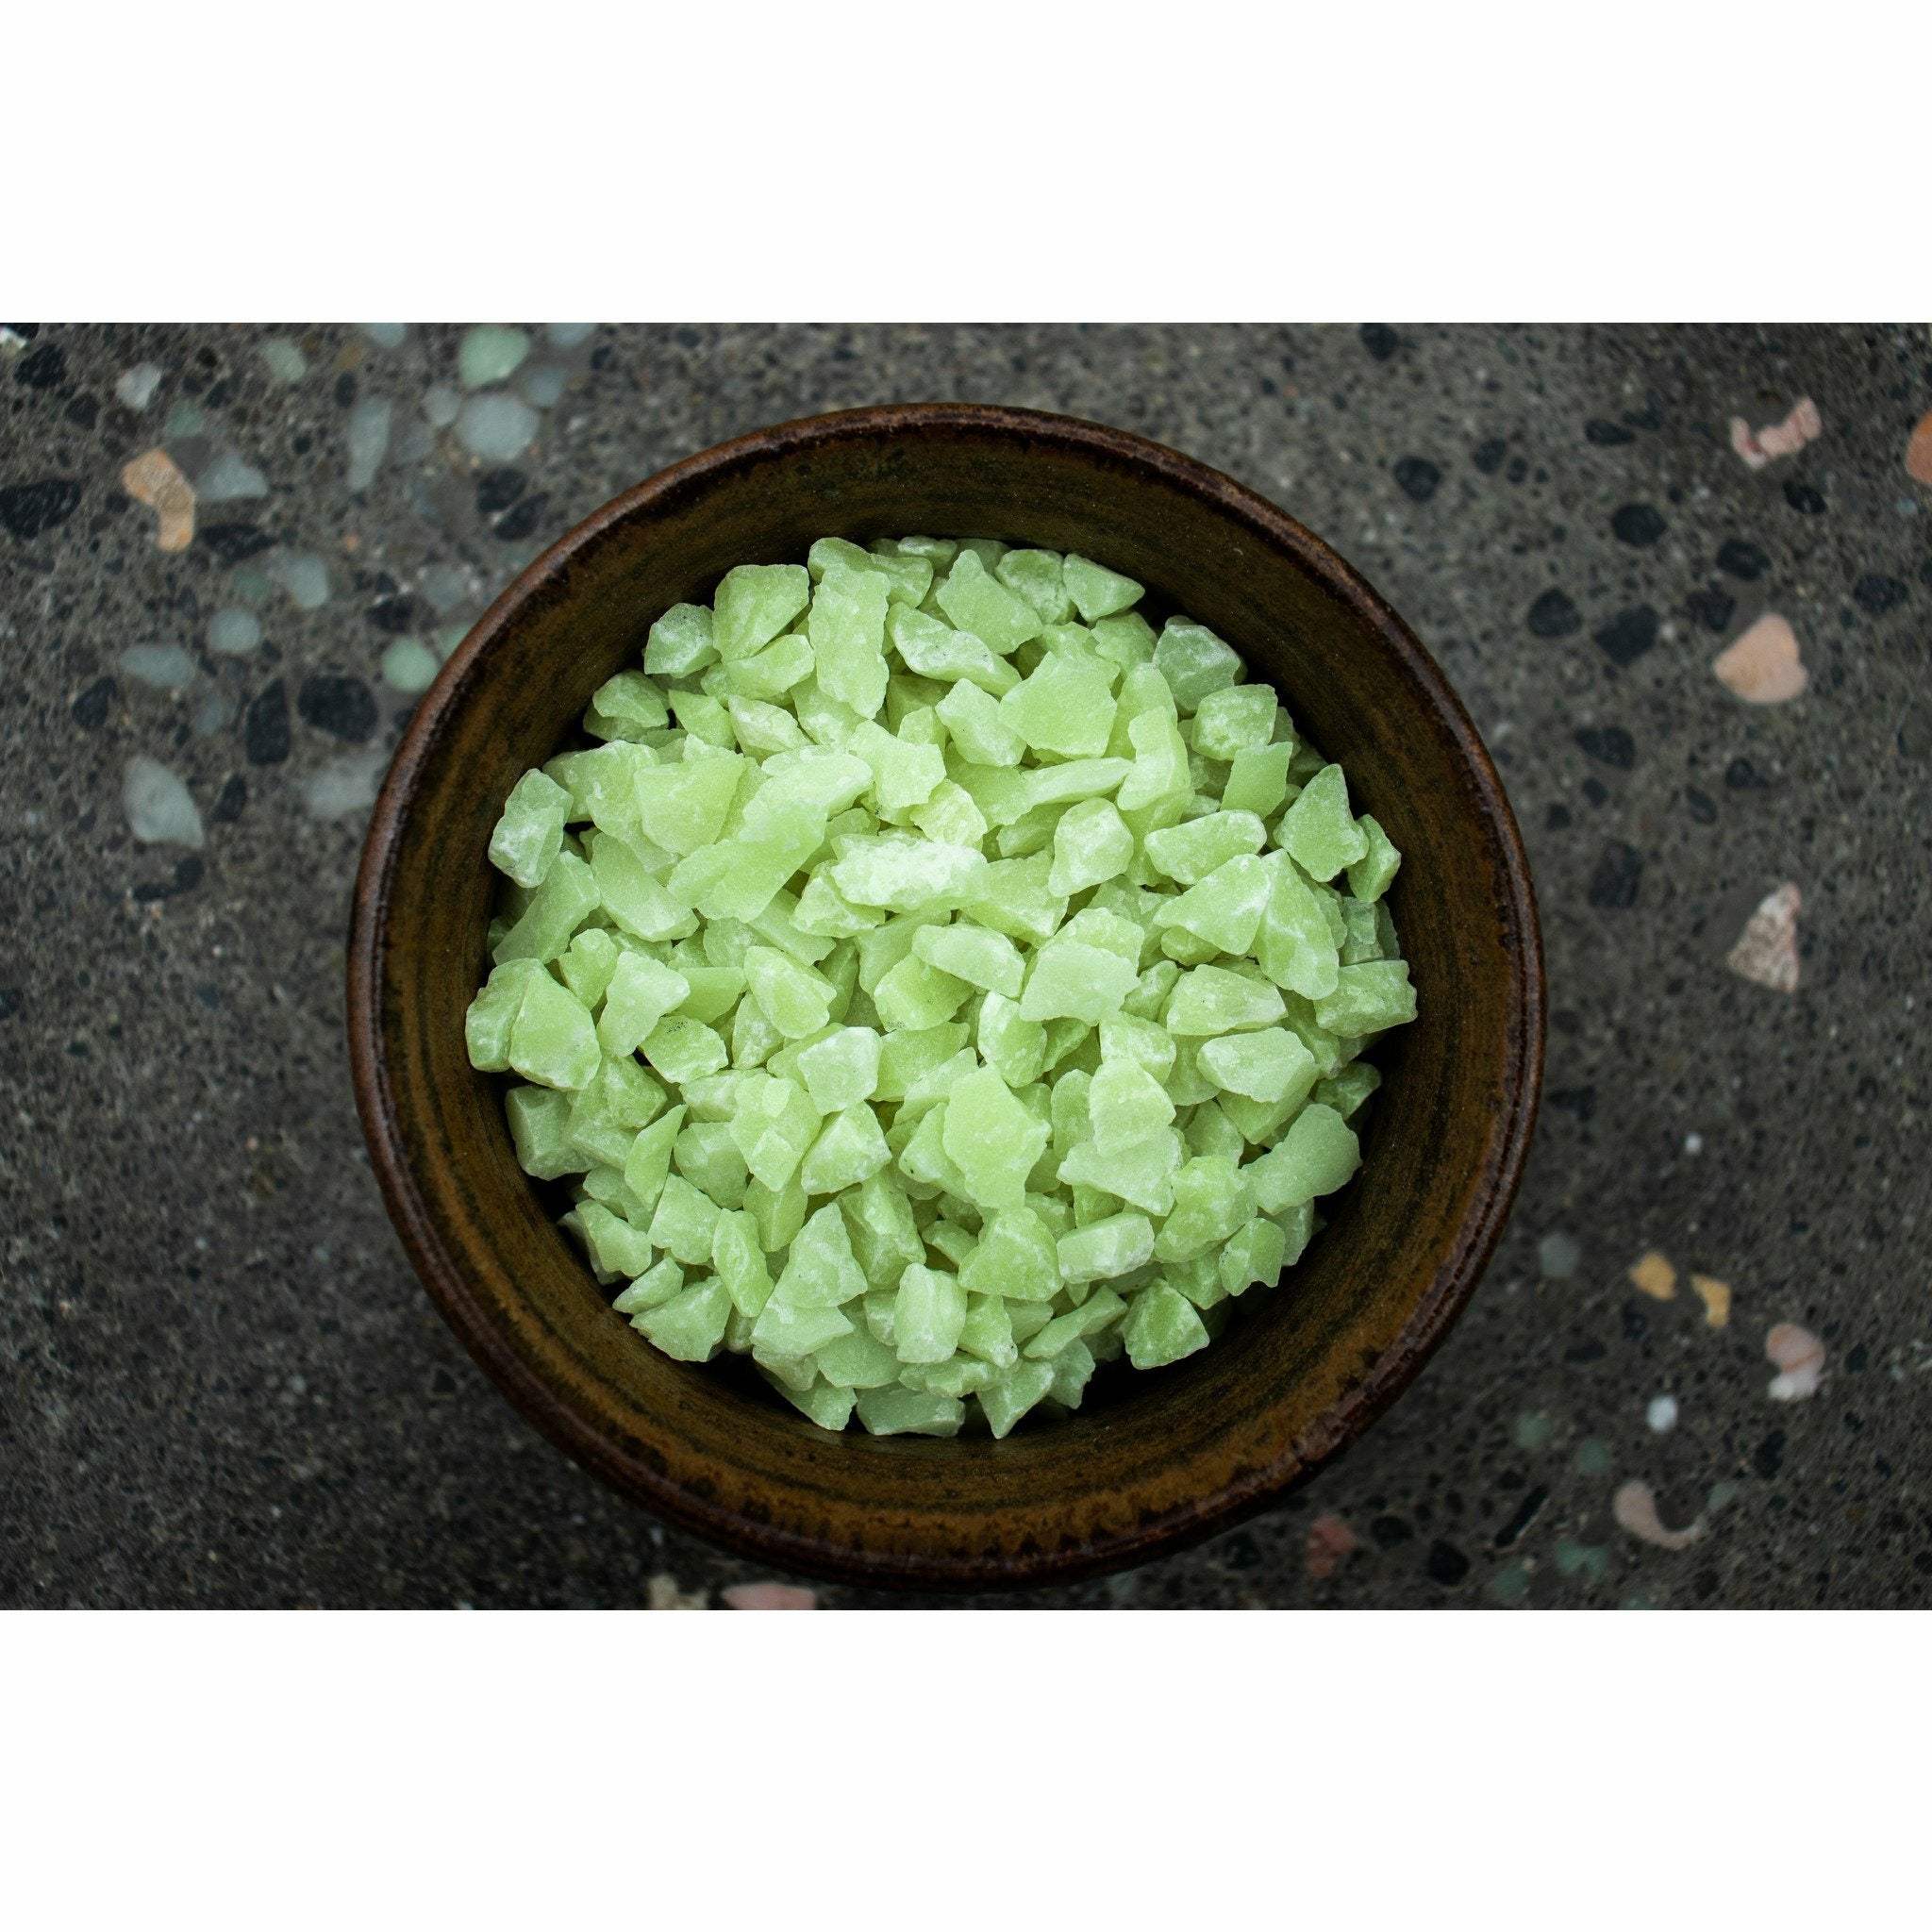 3-8mm Commercial Grade Aggregate - Green (buy 2 get 1 free)*